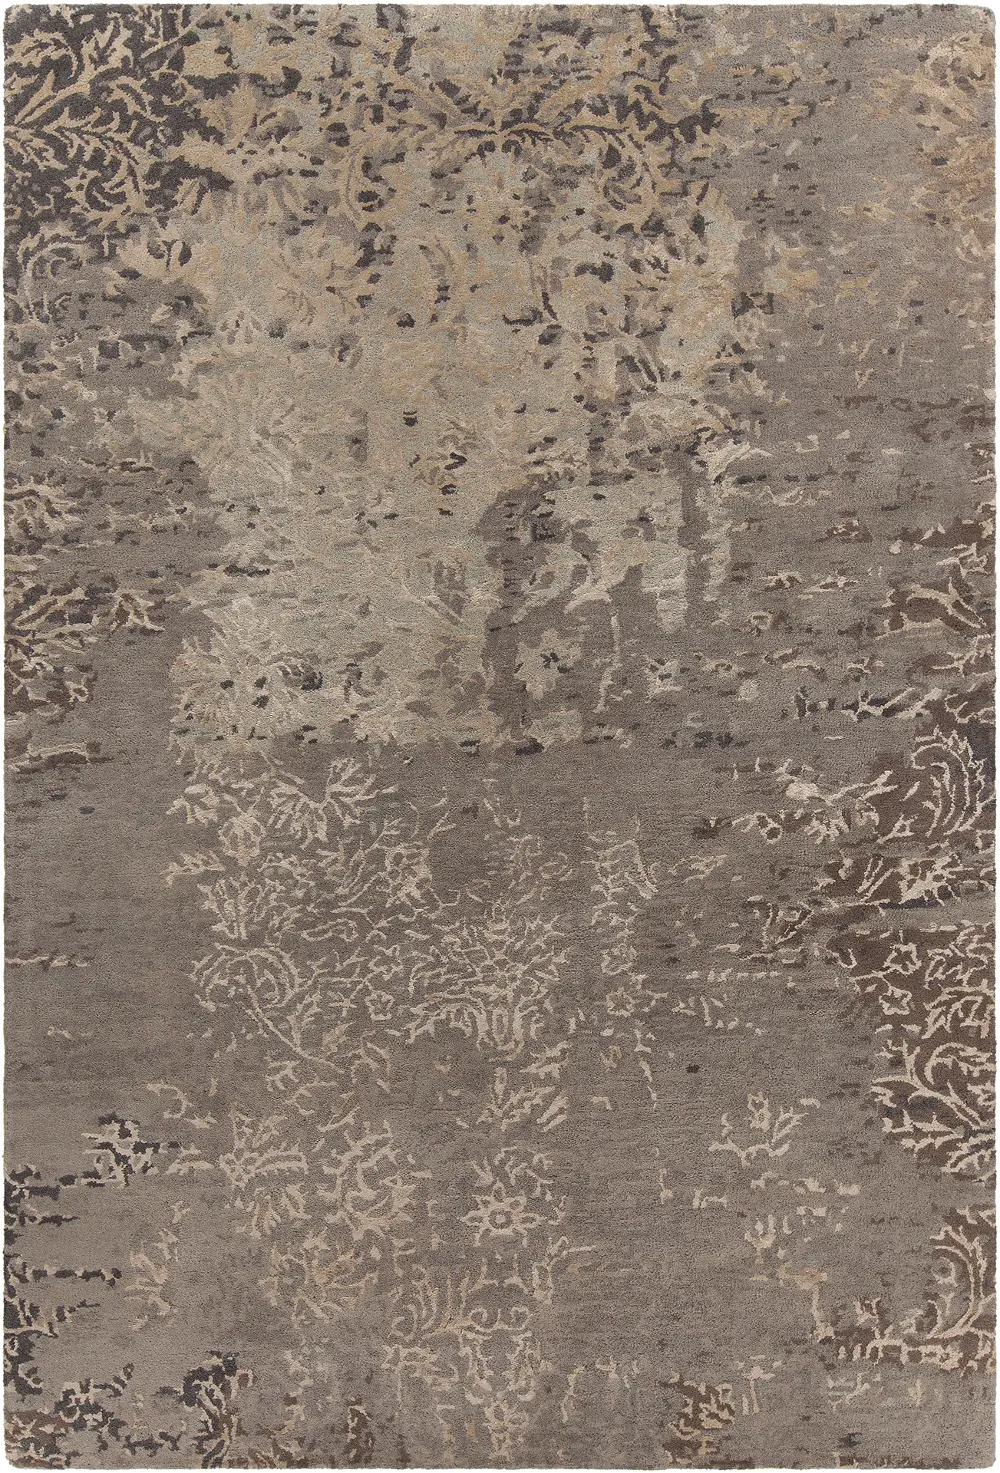 8 x 11 Large Contemporary Gray and Beige Area Rug - Rupec-1